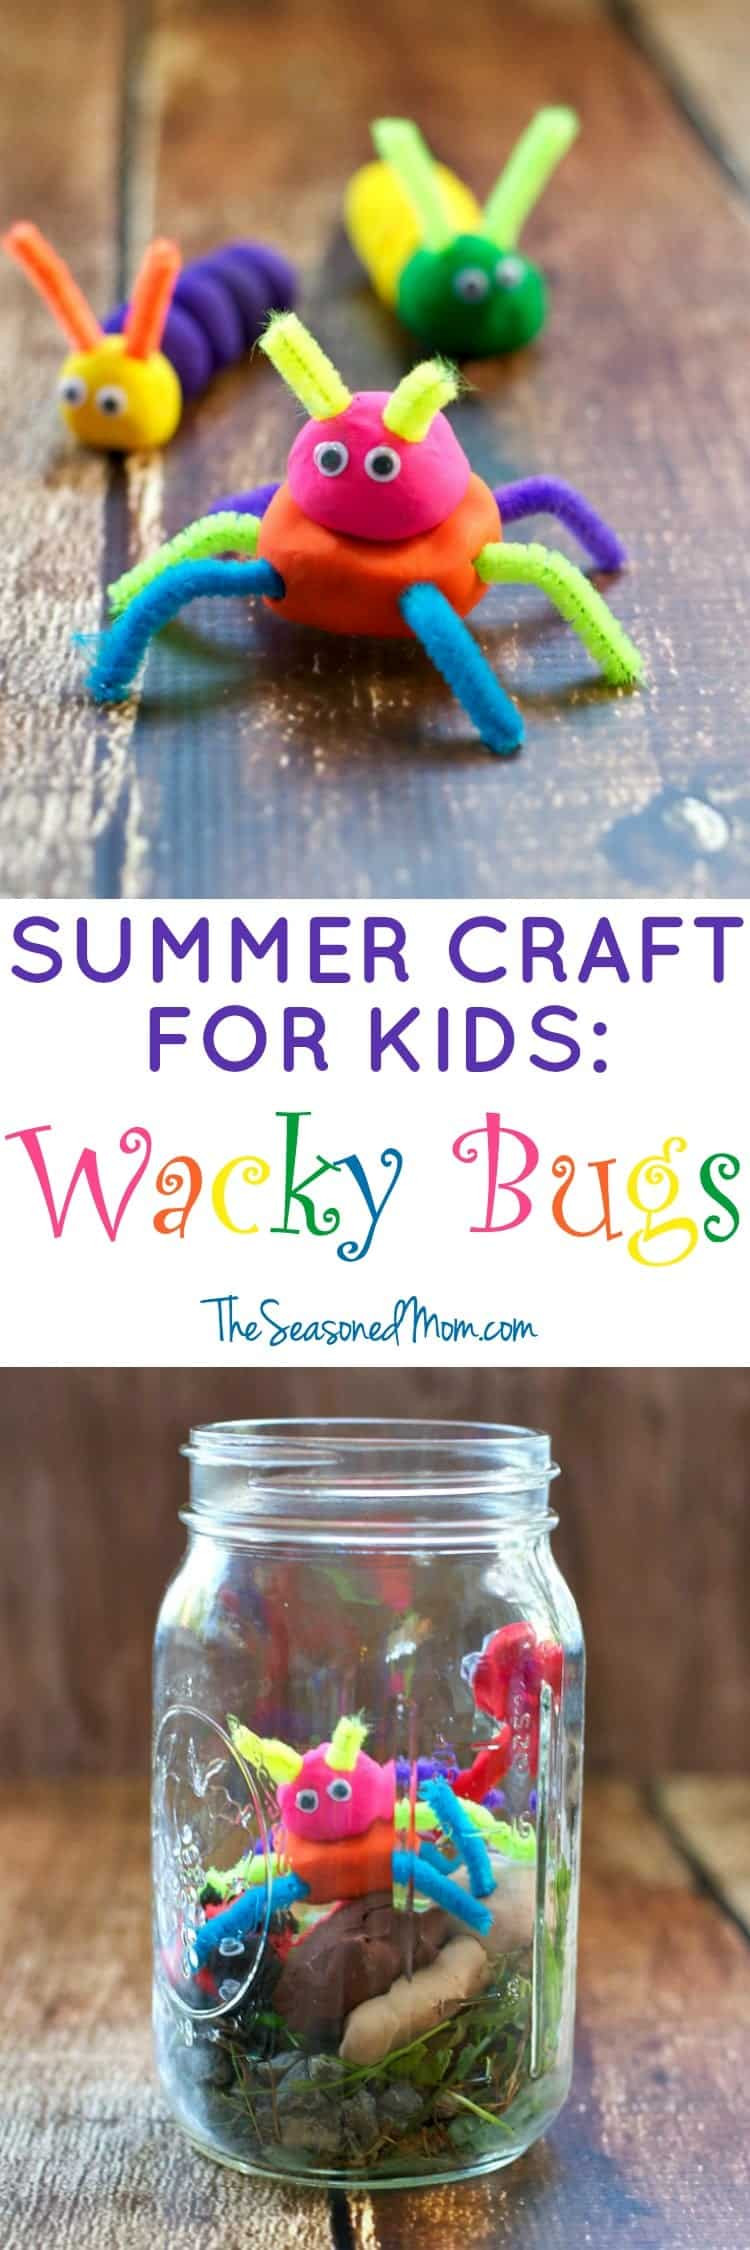 Easy Fun Crafts For Toddlers
 Summer Craft for Kids Wacky Bugs The Seasoned Mom